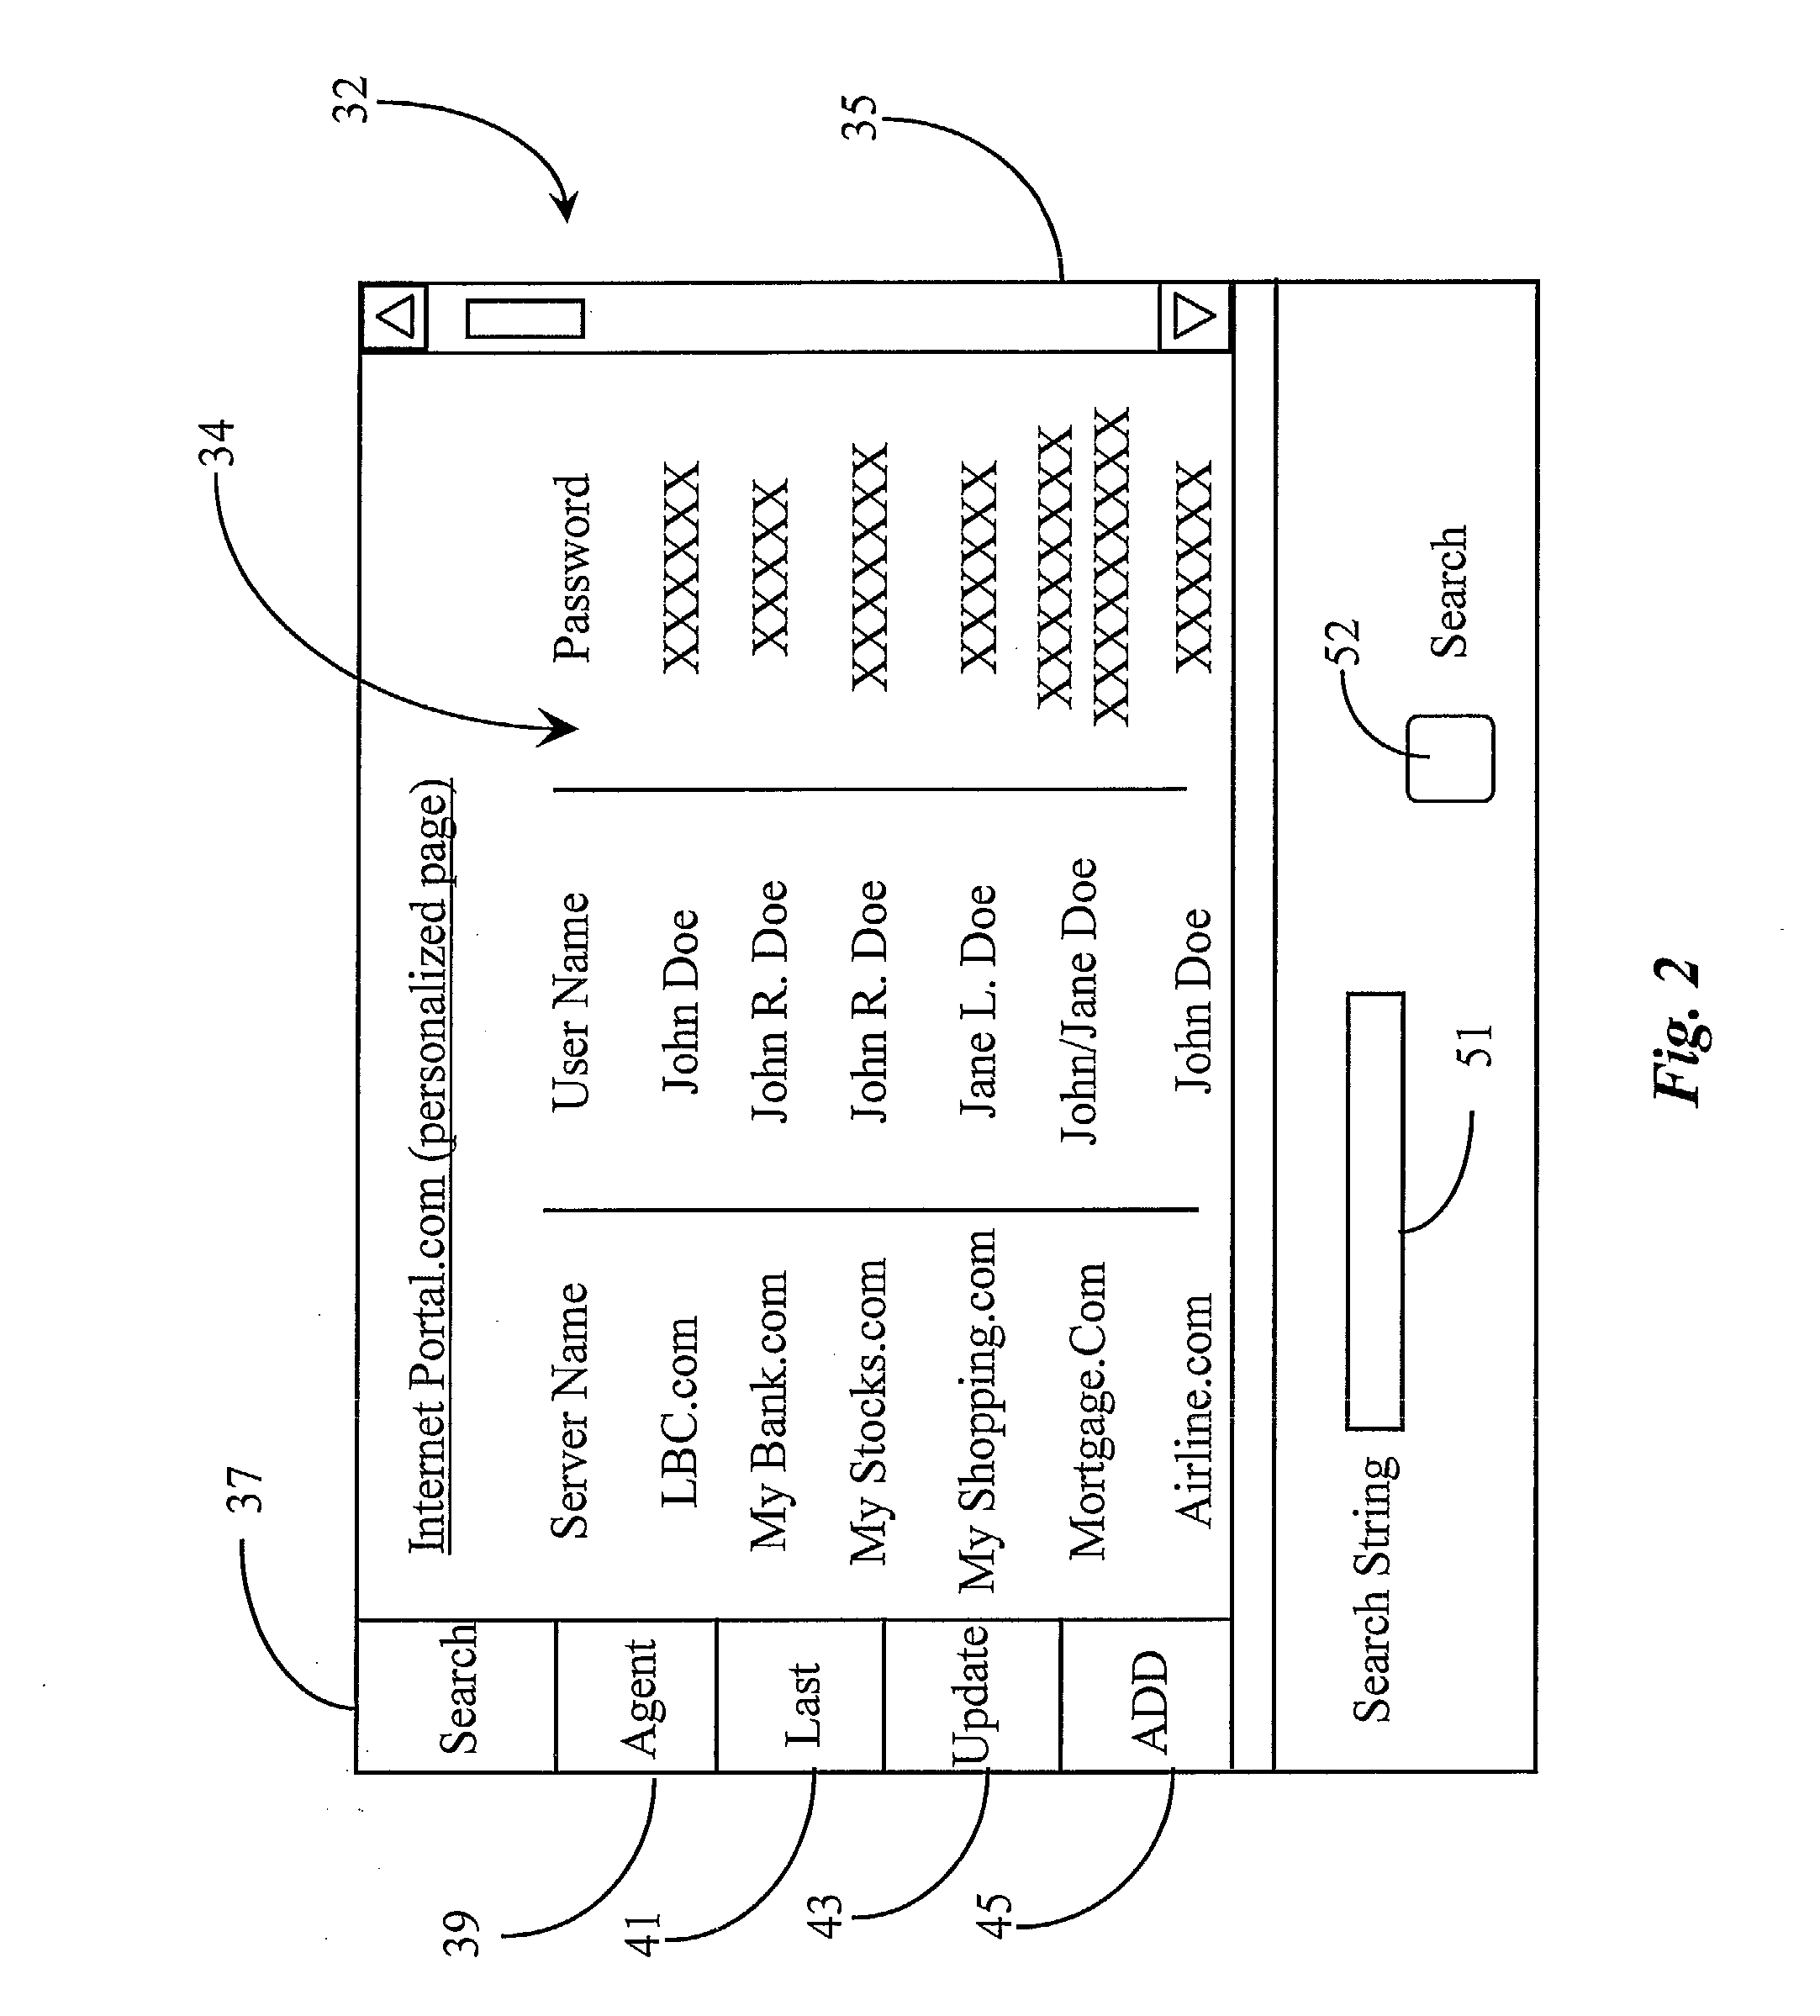 Method and Apparatus for Providing Automation to an Internet Navigation Application